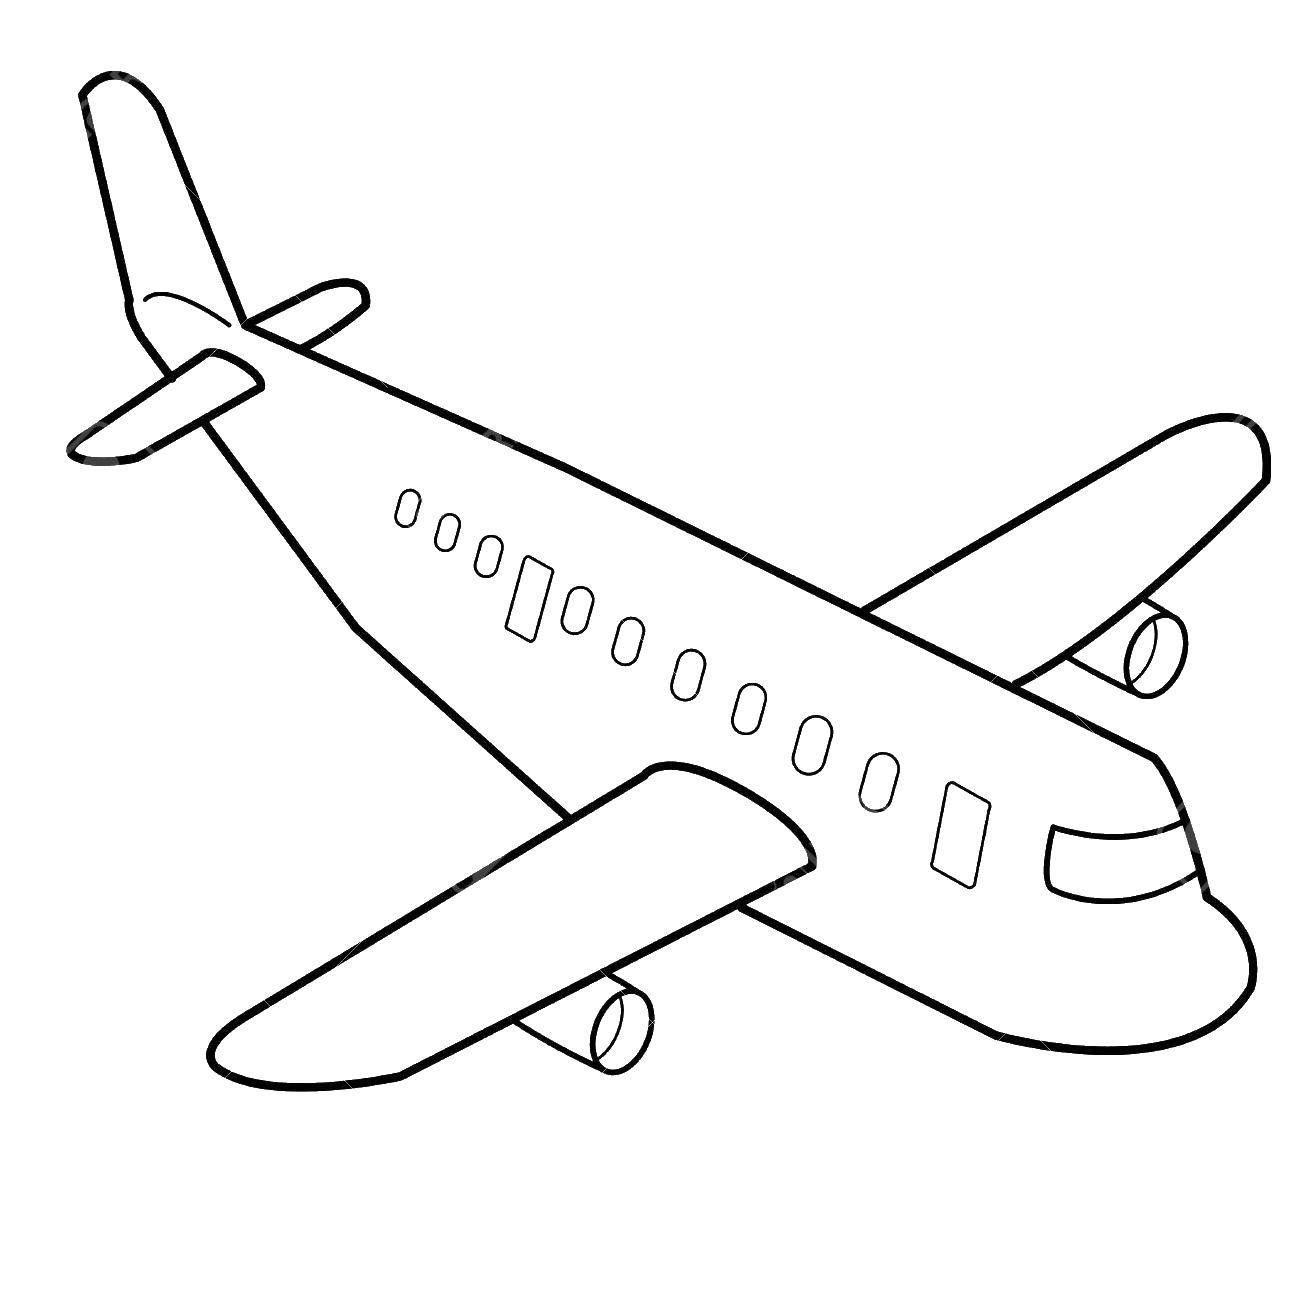 Coloring Airplane. Category the planes. Tags:  aircraft, air transport, Boeing.